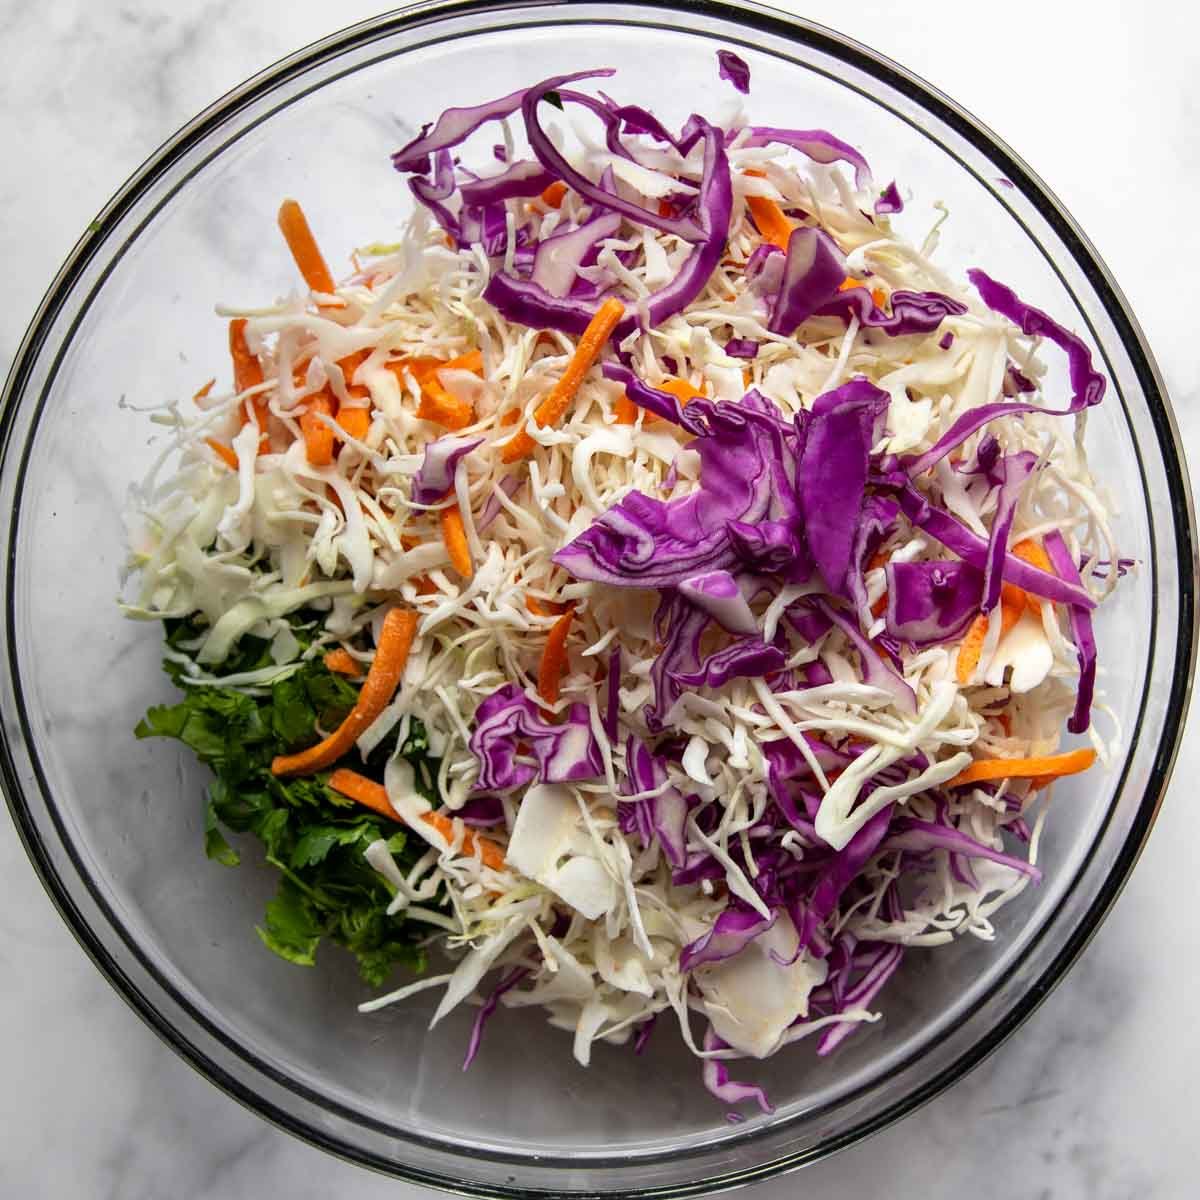 the coleslaw ingredients in a glass bowl.